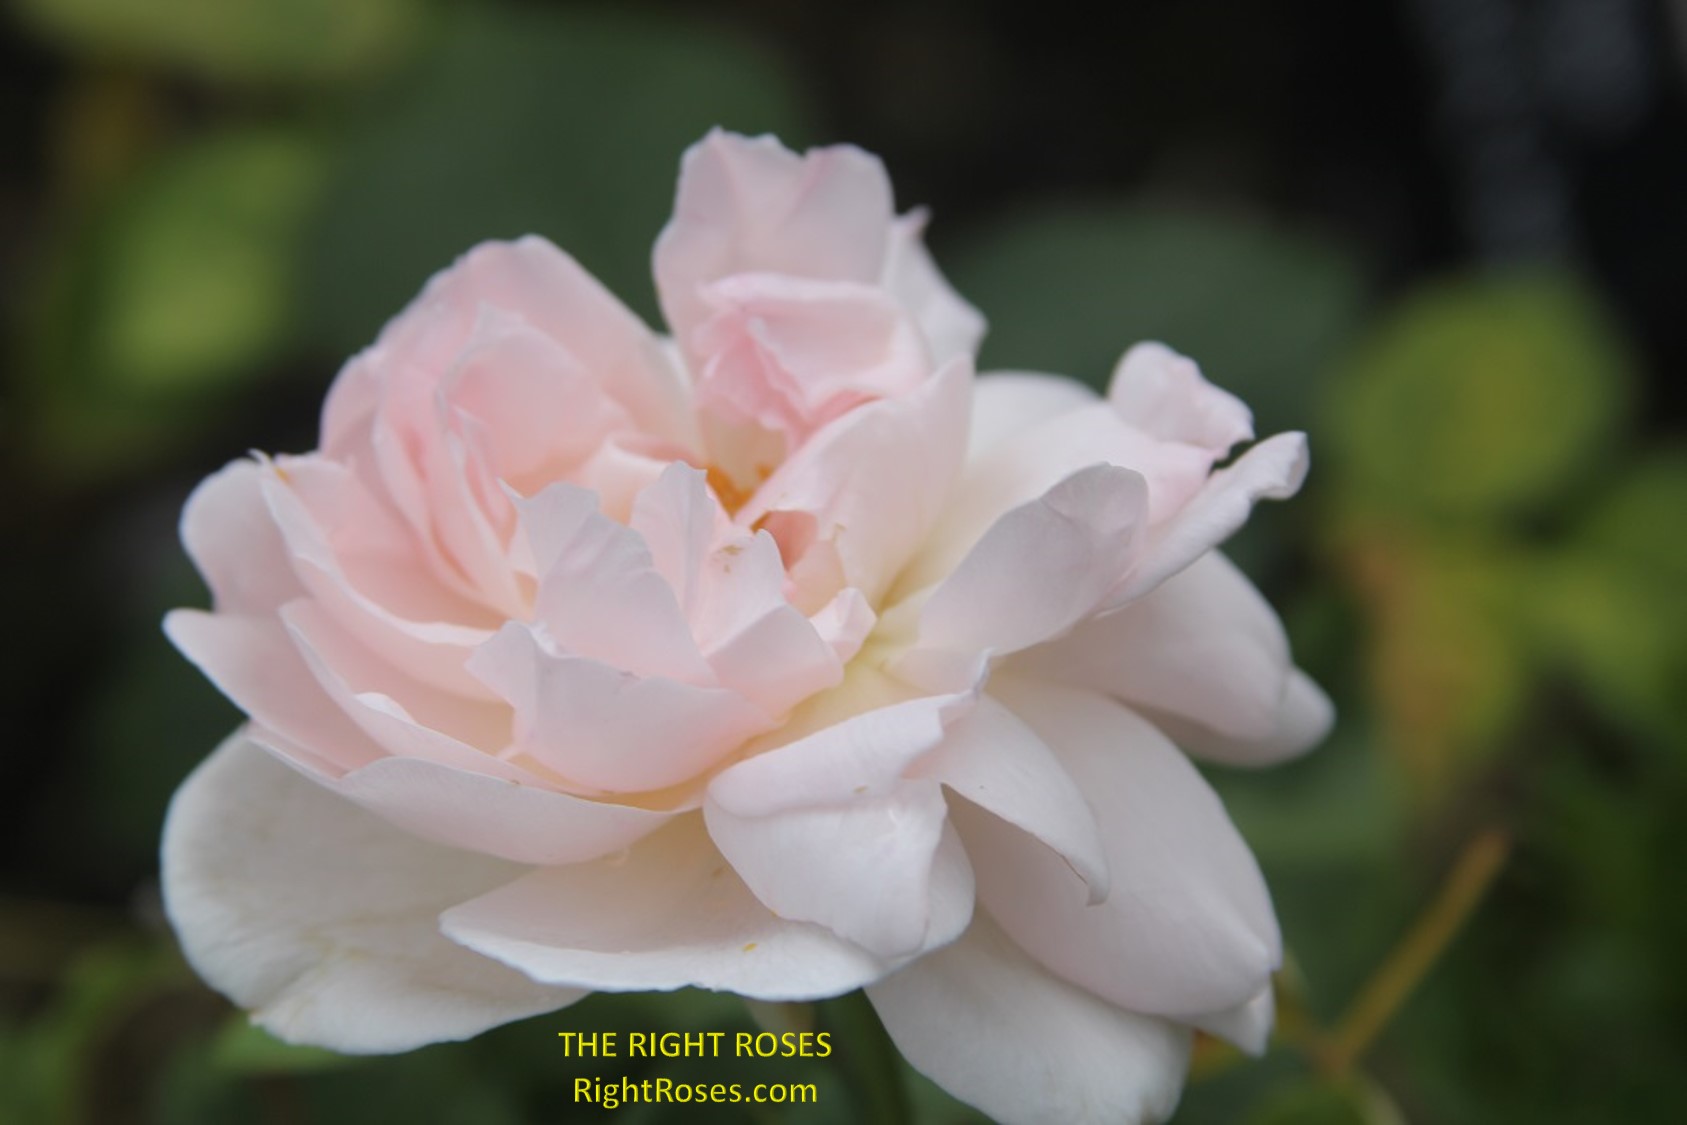 Sharifa Asma rose review the right roses score best top garden store david austin english roses rose products rose rating the right leap rose food fertilizer